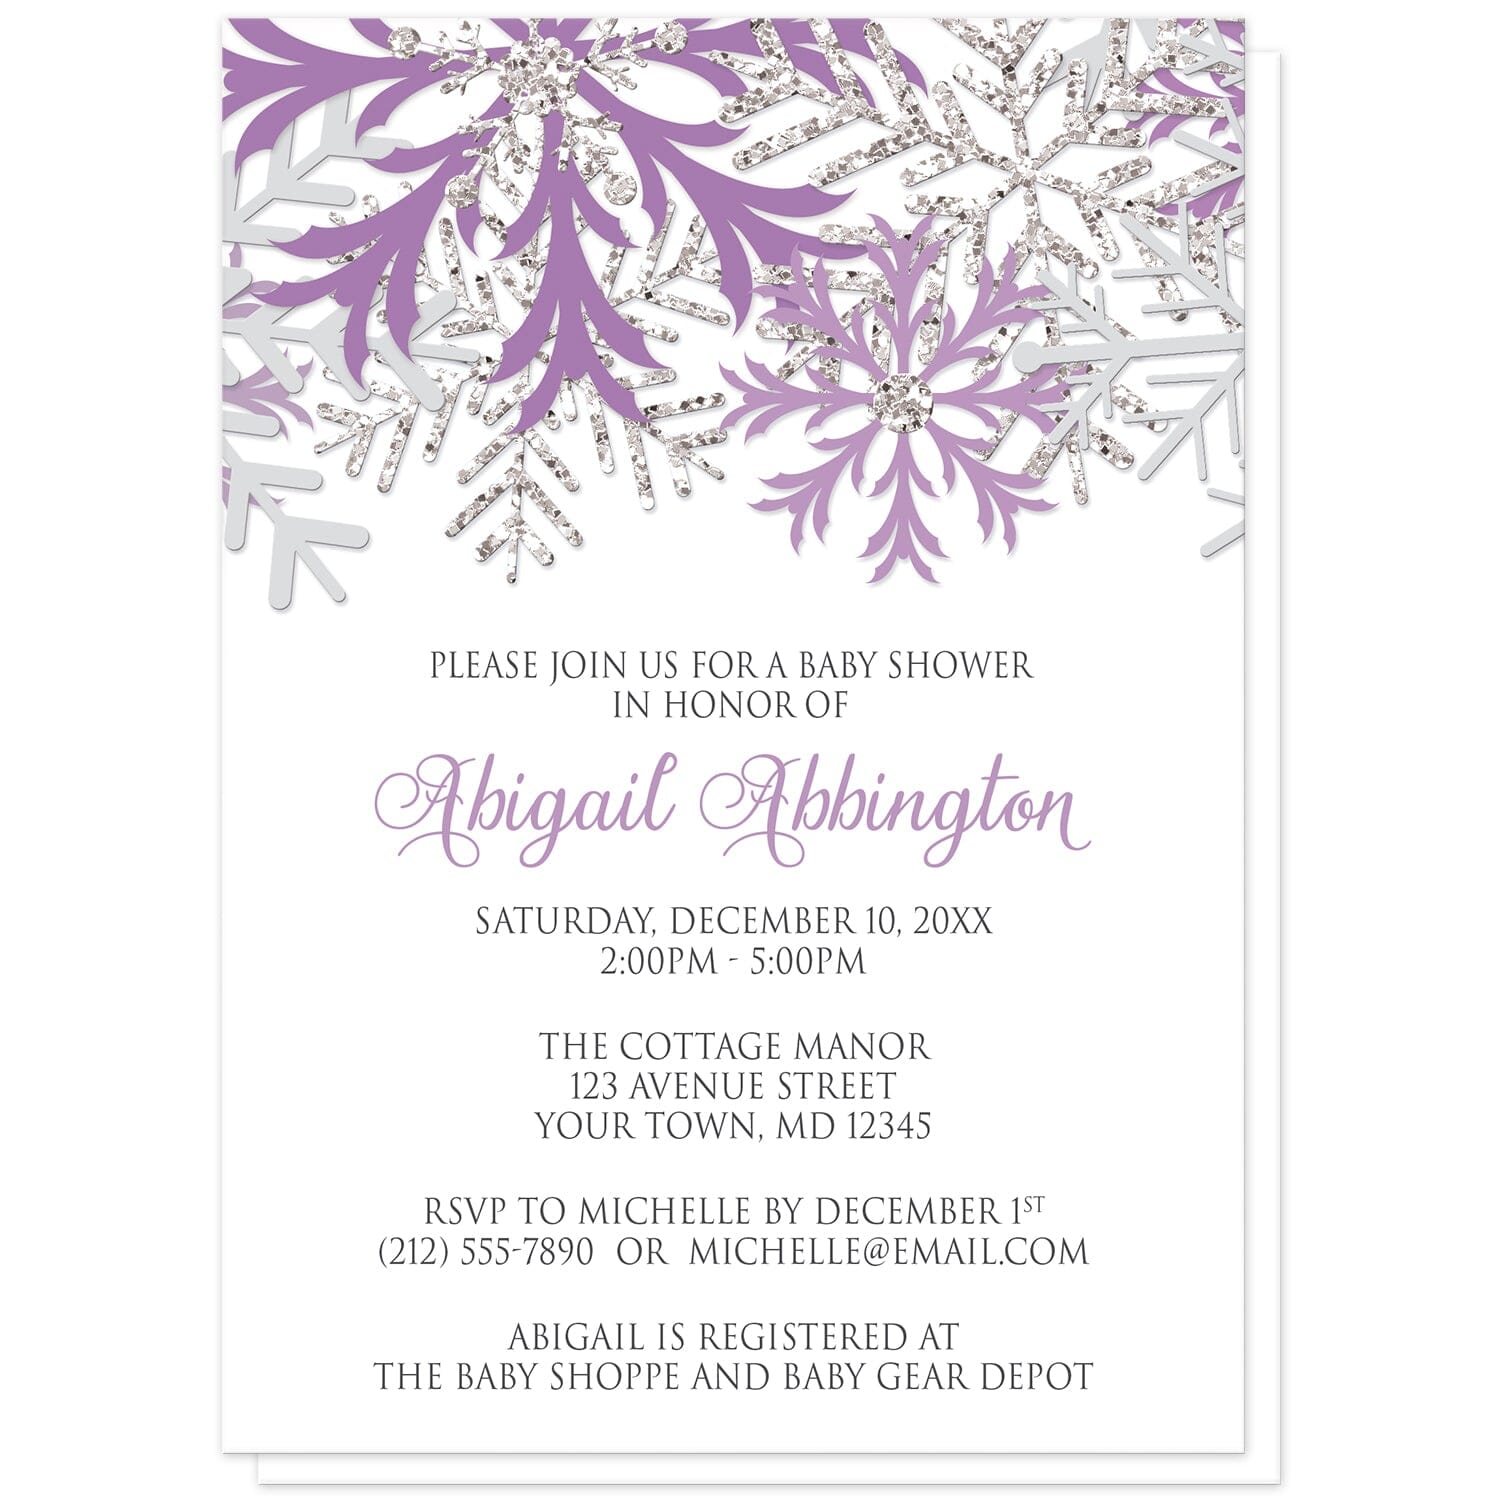 Winter Purple Silver Snowflake Baby Shower Invitations at Artistically Invited. Beautiful winter purple silver snowflake baby shower invitations designed with purple, light purple, silver-colored glitter-illustrated, and light gray snowflakes along the top over a white background. Your personalized baby shower celebration details are custom printed in purple and gray below the pretty snowflakes.